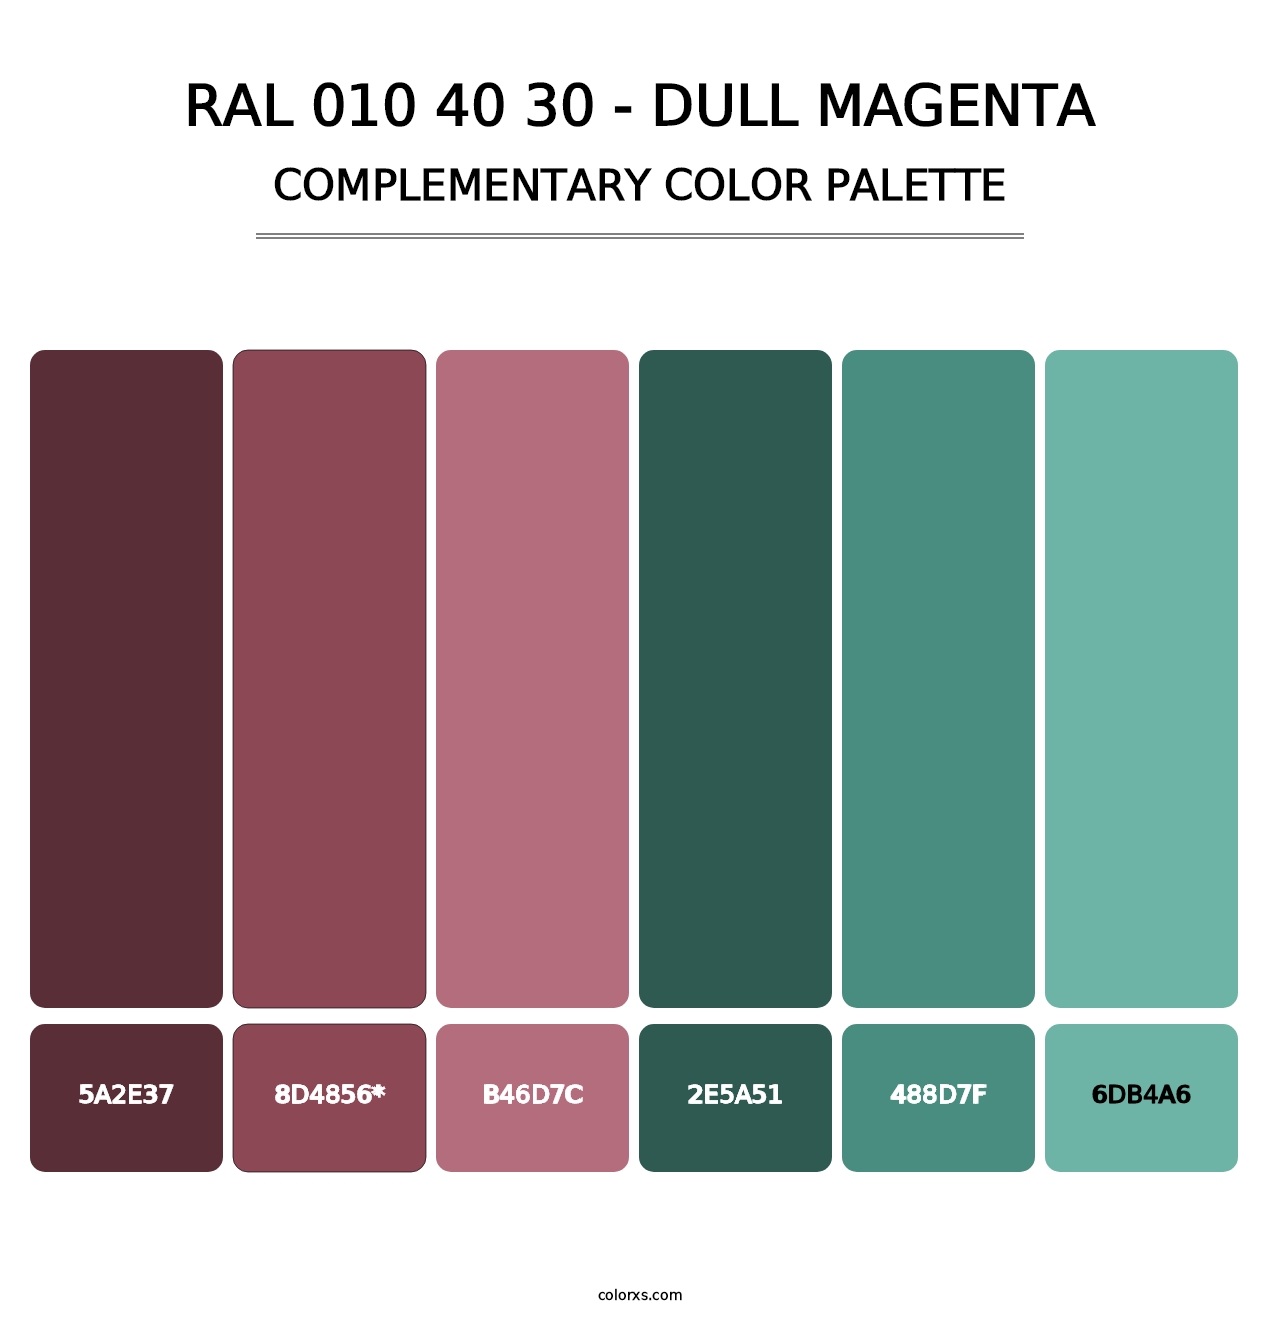 RAL 010 40 30 - Dull Magenta - Complementary Color Palette